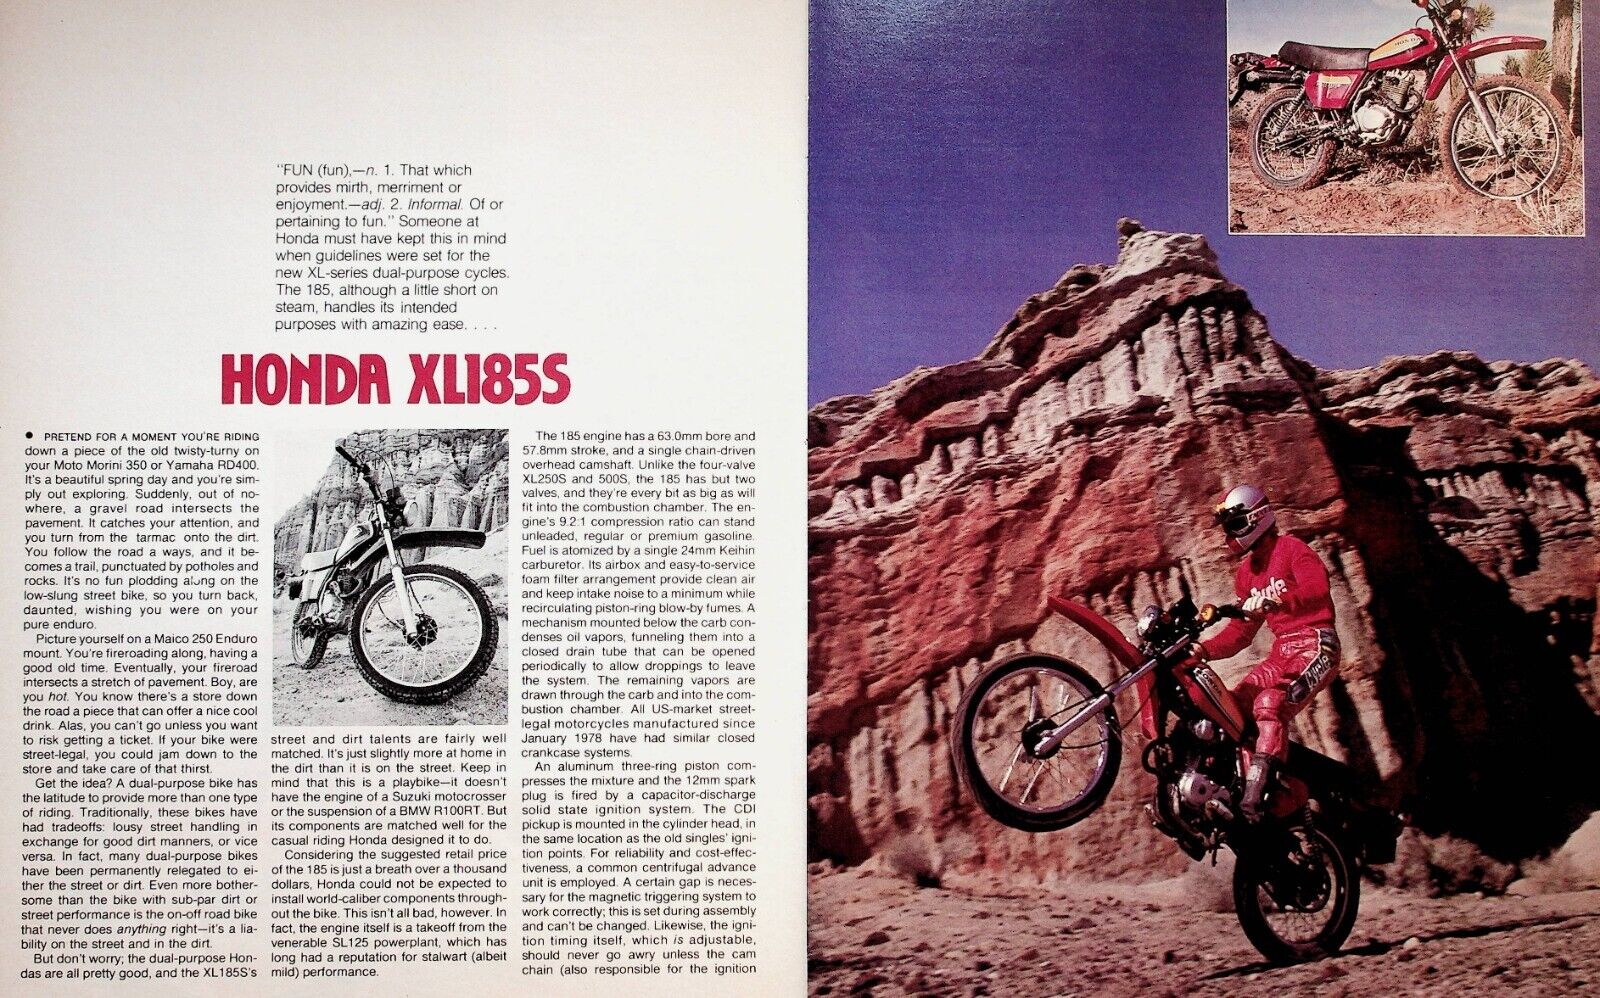 1979 Honda XL185S Motorcycle Road Test - 9-Page Vintage Article